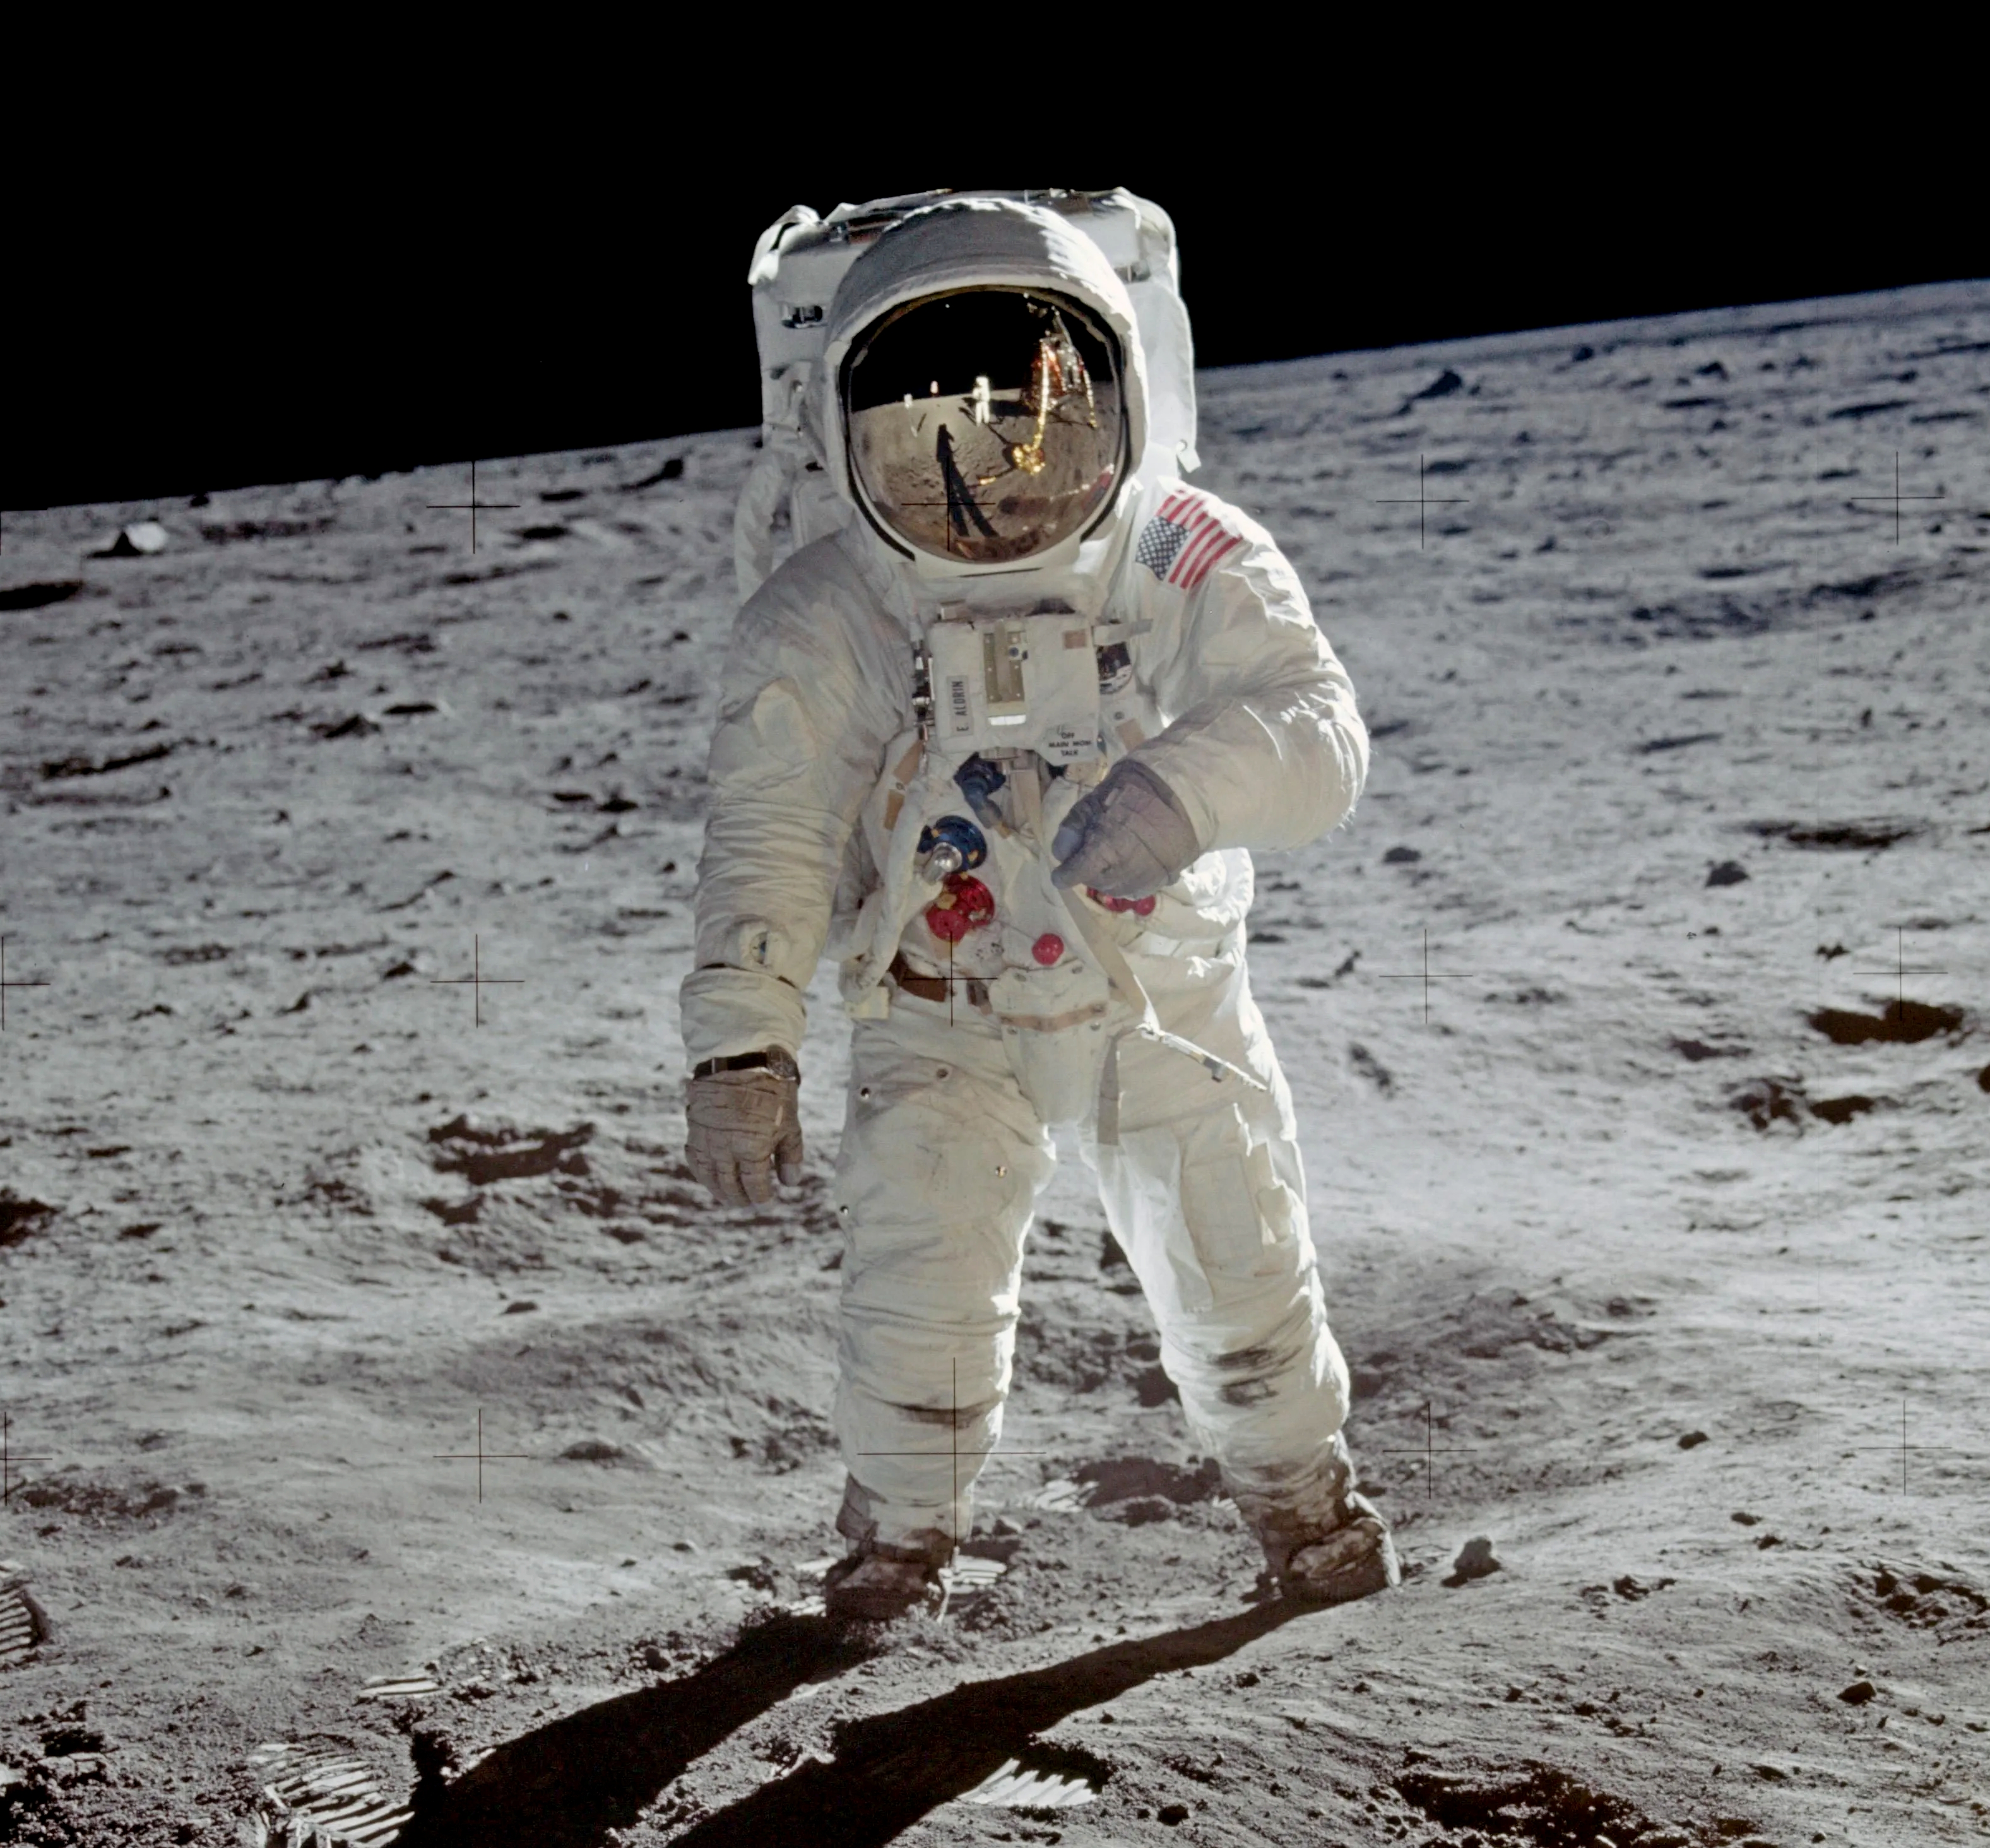 Man landed on the moon. Аполлон 11.